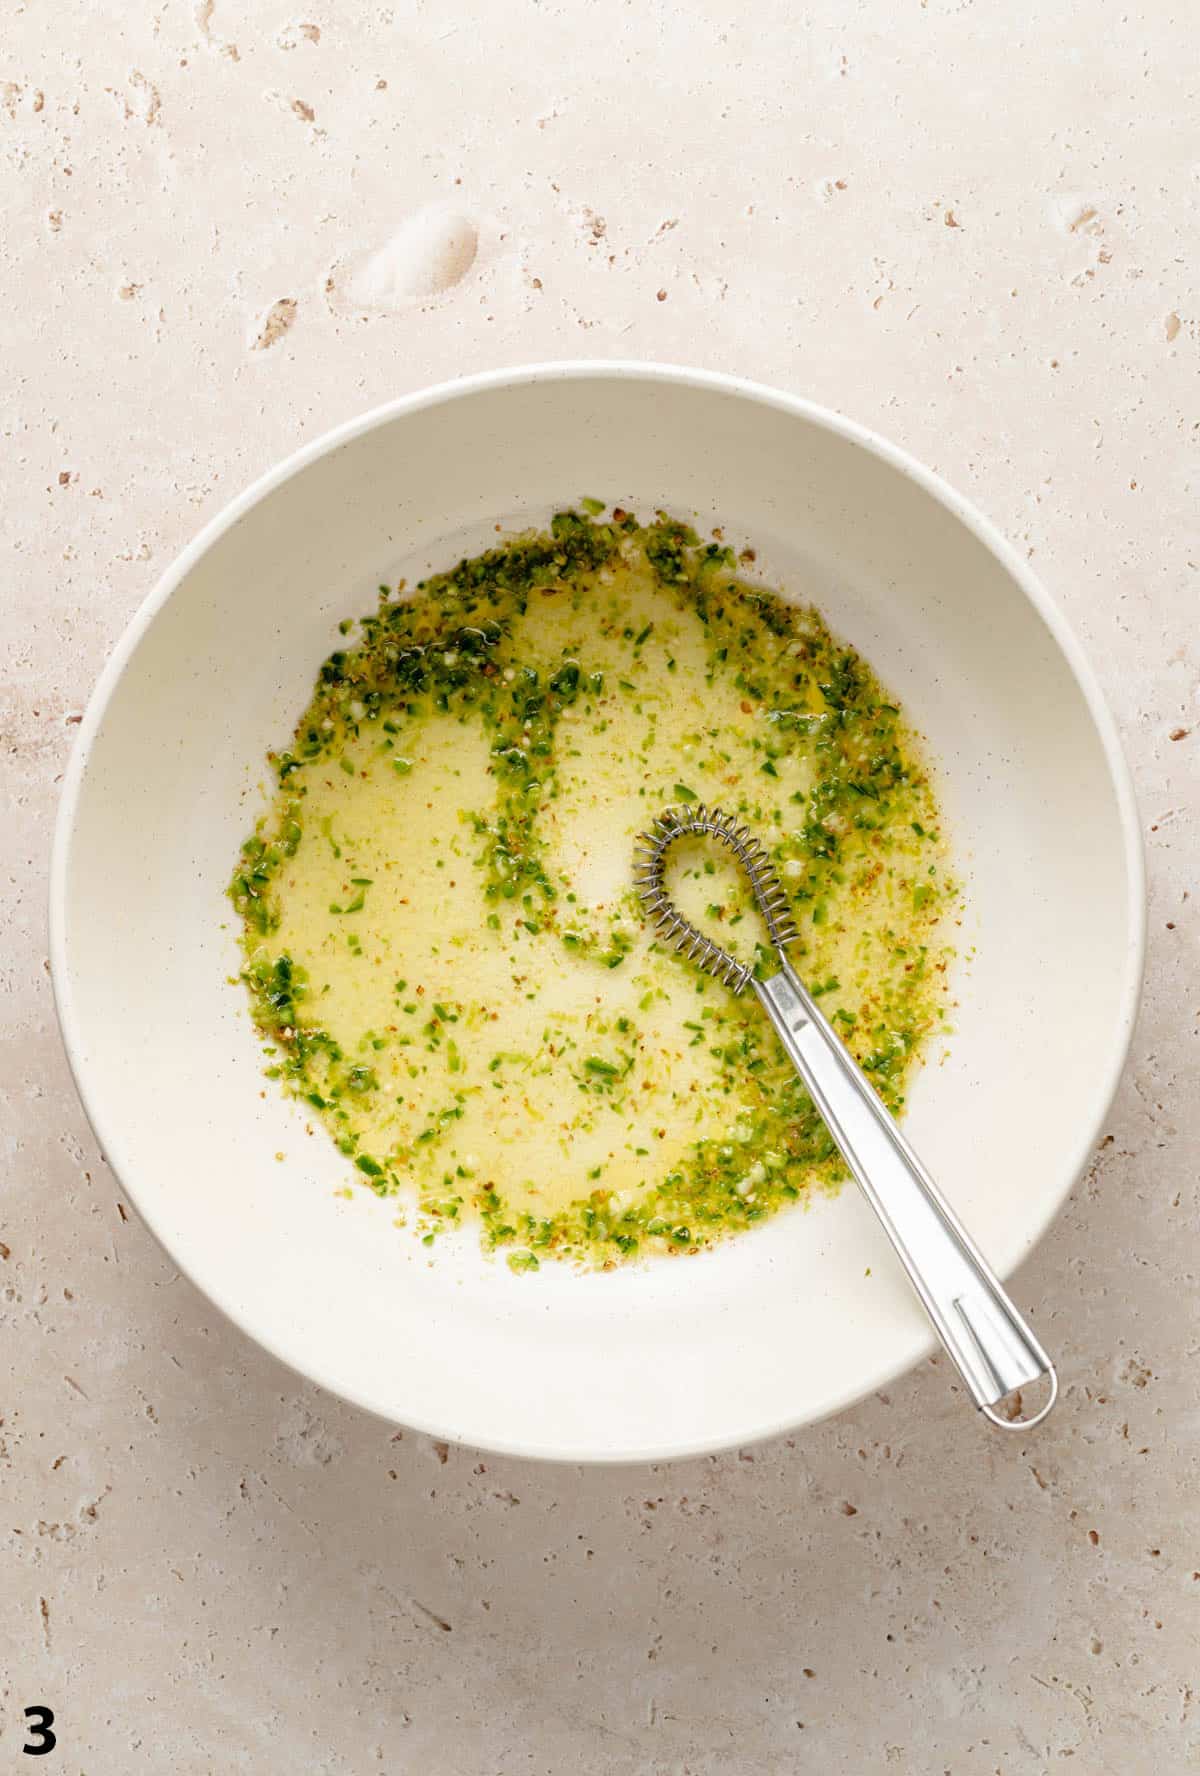 Jalapeno lime dressing whisked together in a large bowl with a whisk.